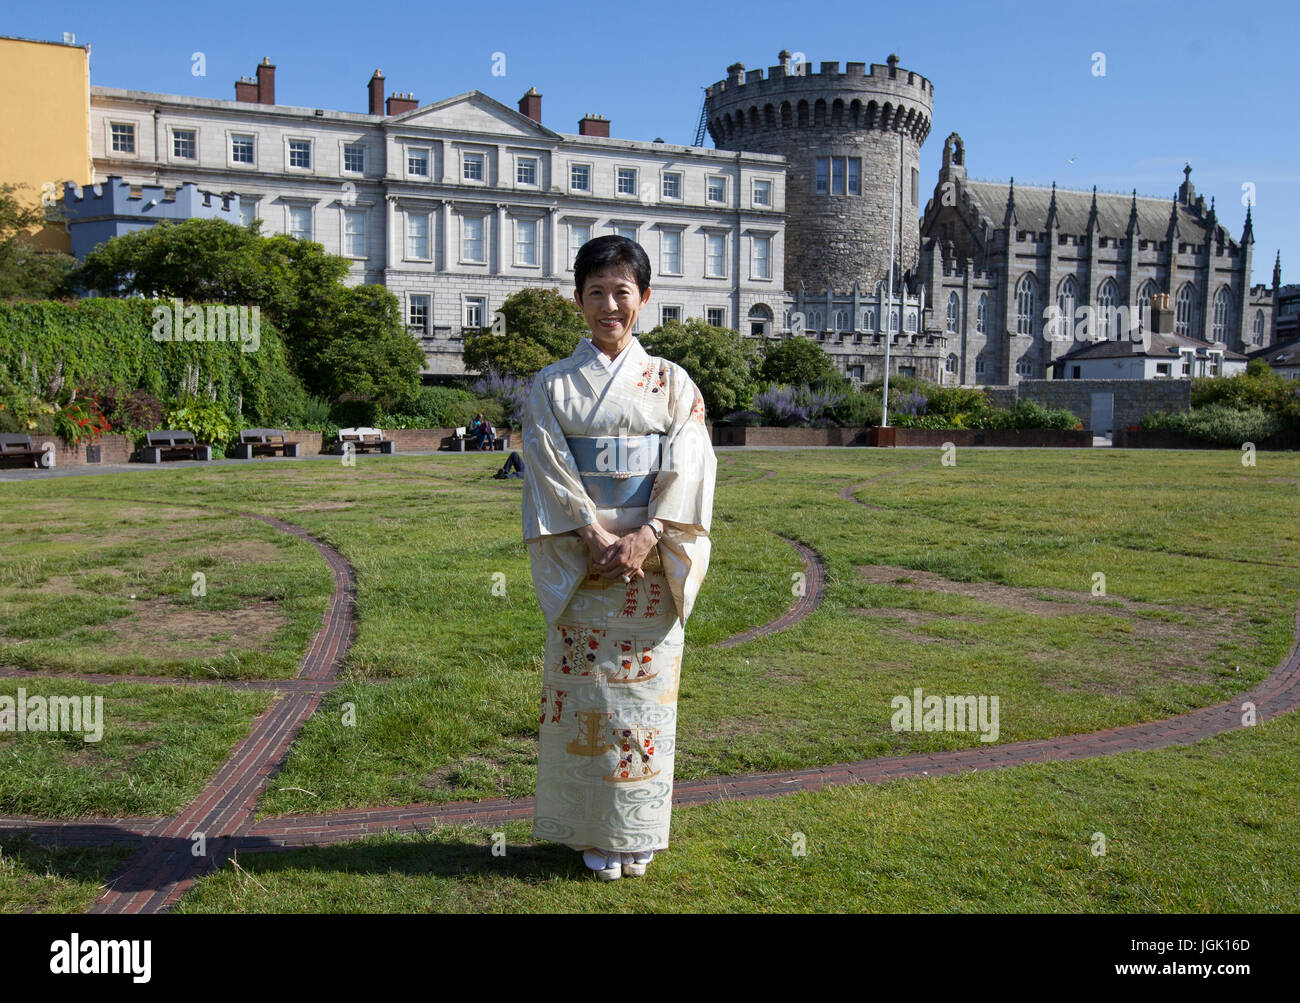 Dublin, Ireland. 08th July, 2017. 8/7/2017. Princess Takamado Visits the Chester Beatty Library. Her Imperial Highness, Princess Takamado of Japan wears a traditional kimono in Dublin Castle, on her way to visit the Chester Beatty Library, to inaugurate the special exhibition ‘Preserved in Partnership: Treasures of Japanese Art’. Credit: RollingNews.ie/Alamy Live News Stock Photo